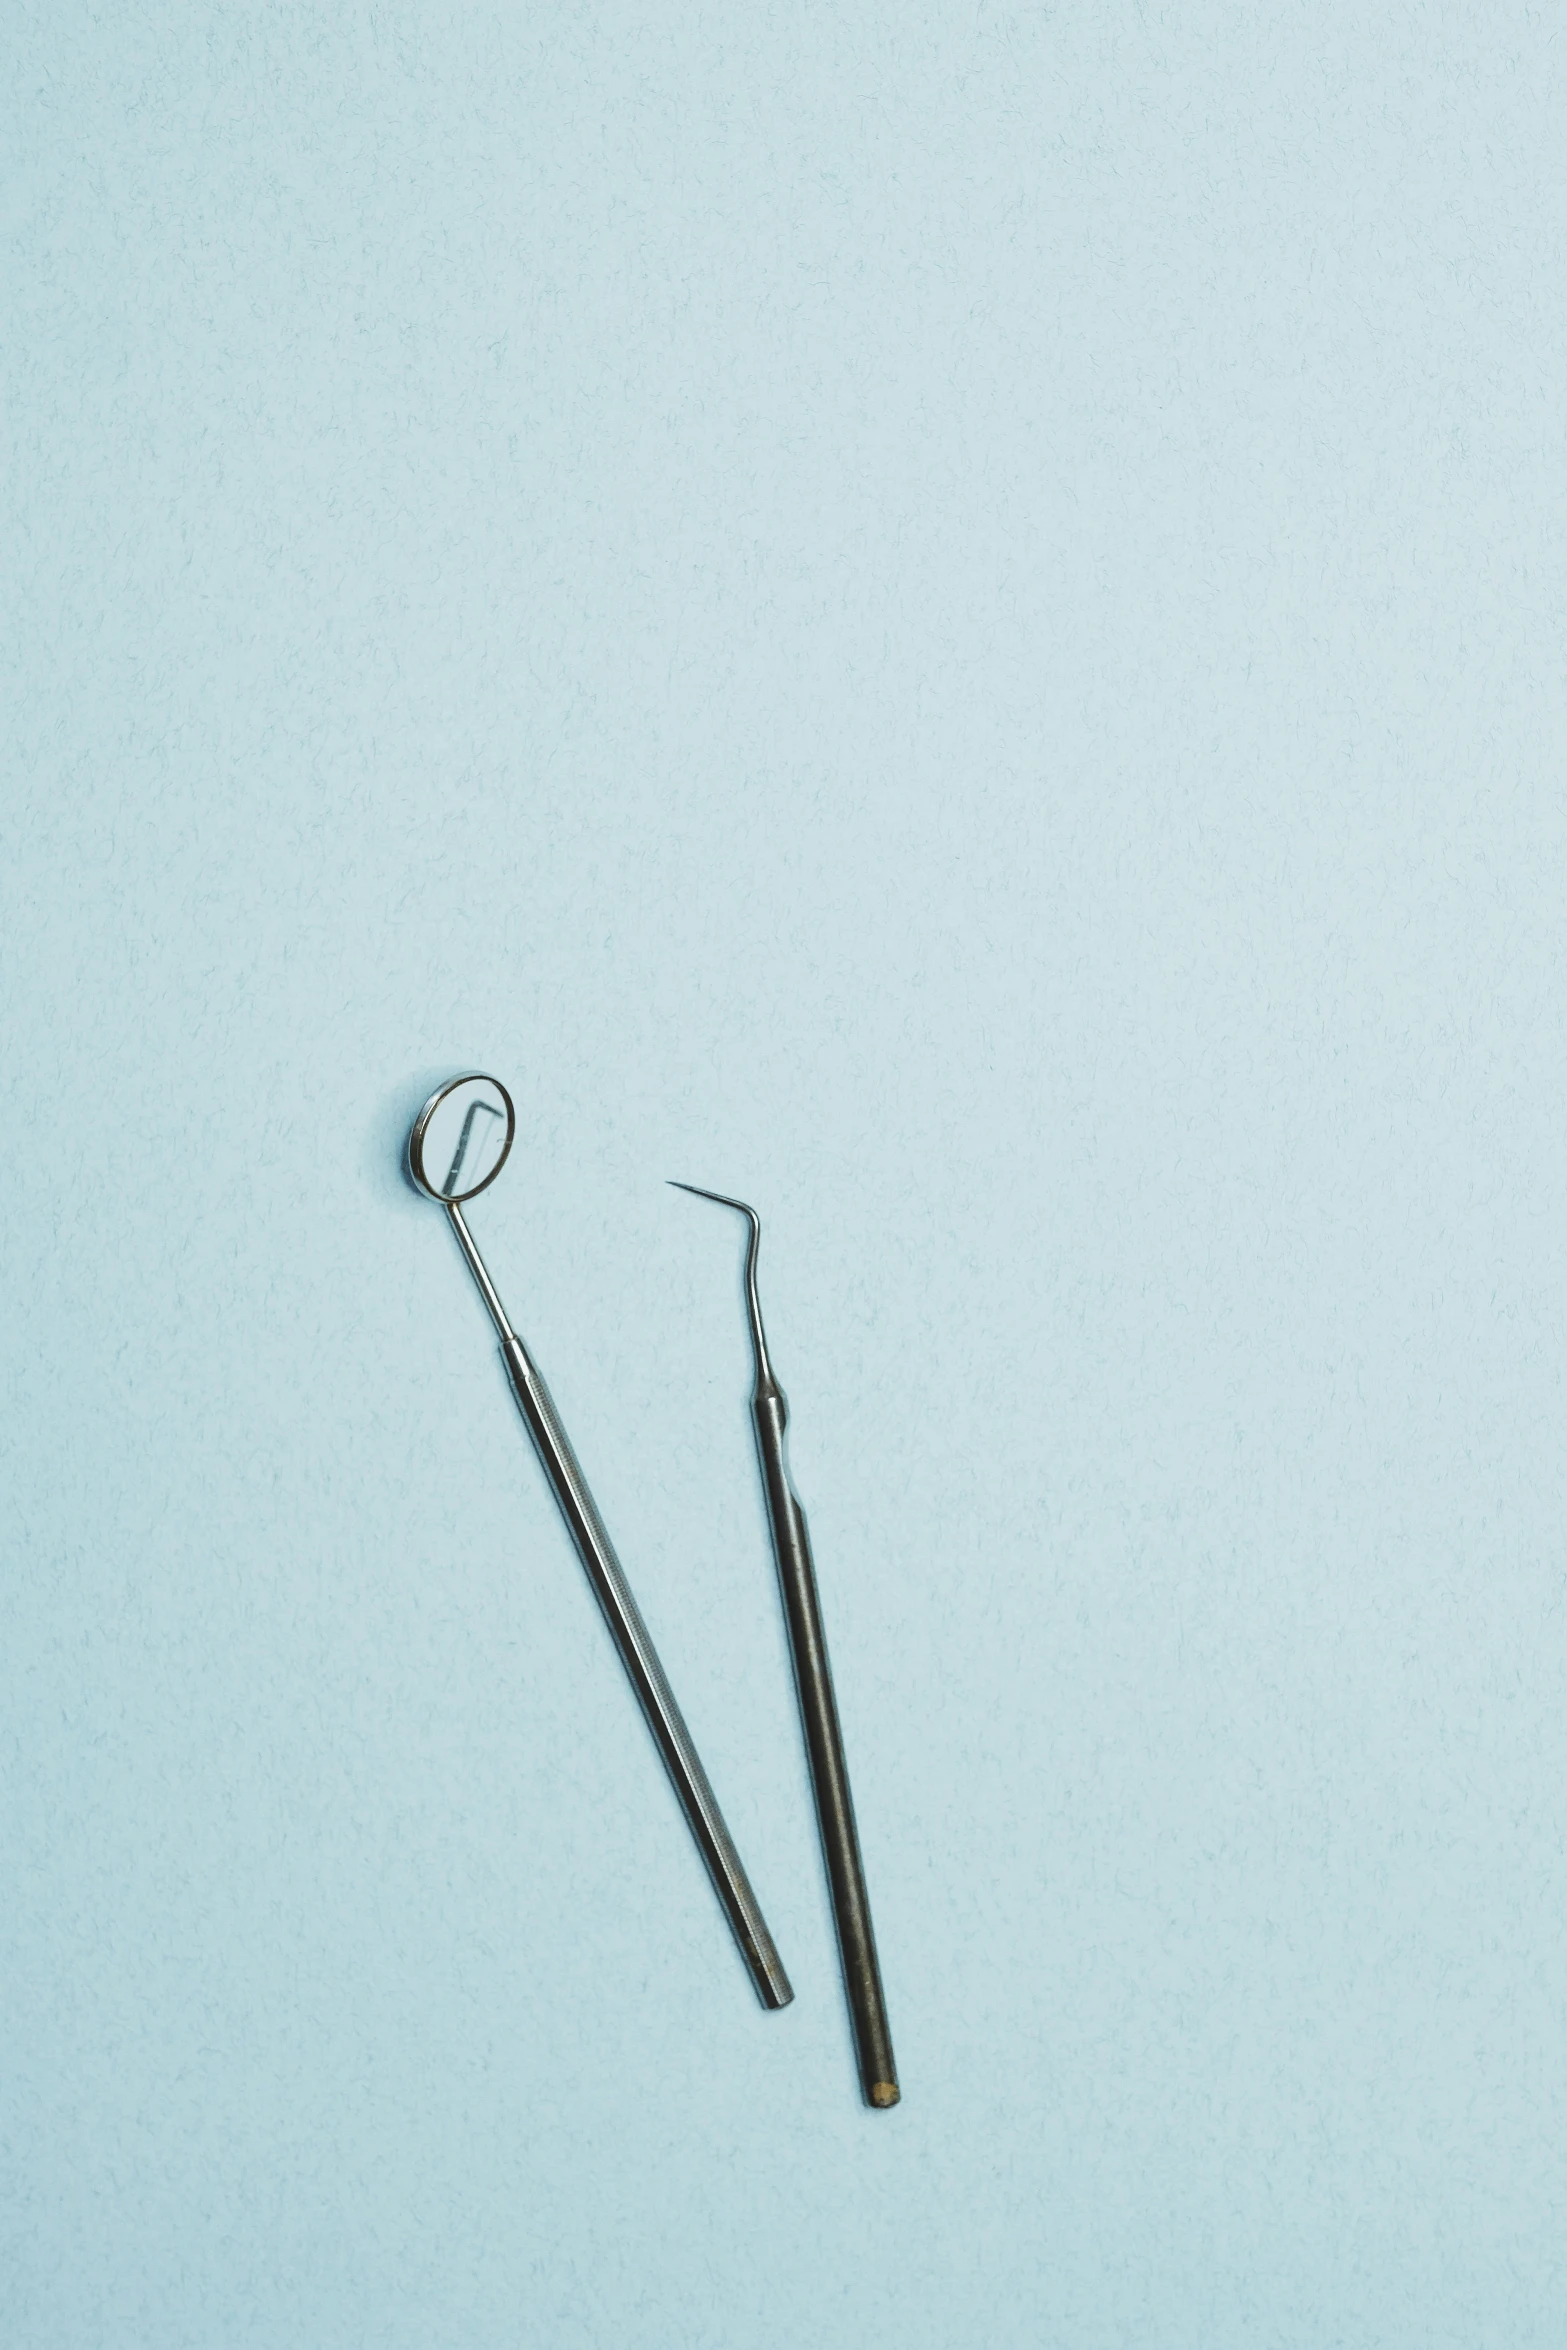 a pair of dental instruments laying side by side on a light blue surface